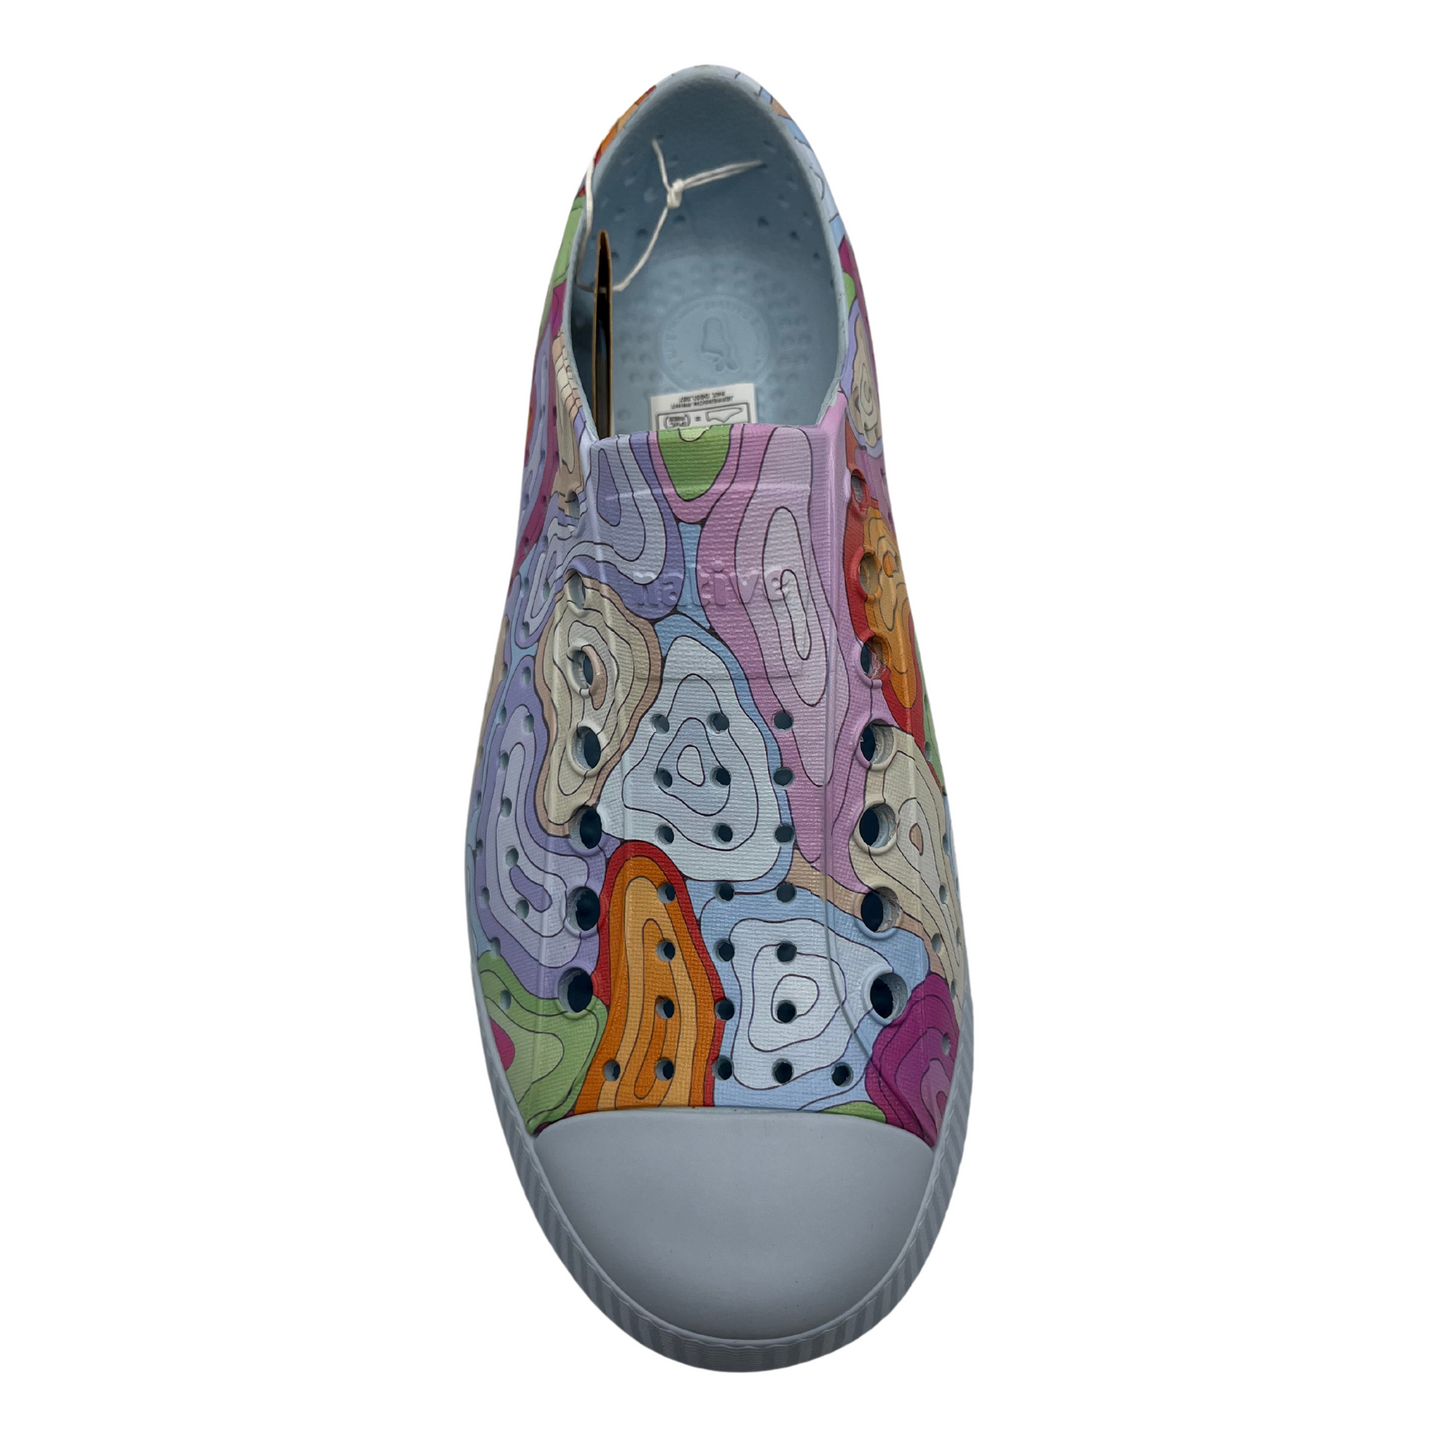 Top view of colourful EVA slip on shoes with rounded toe and perforated upper